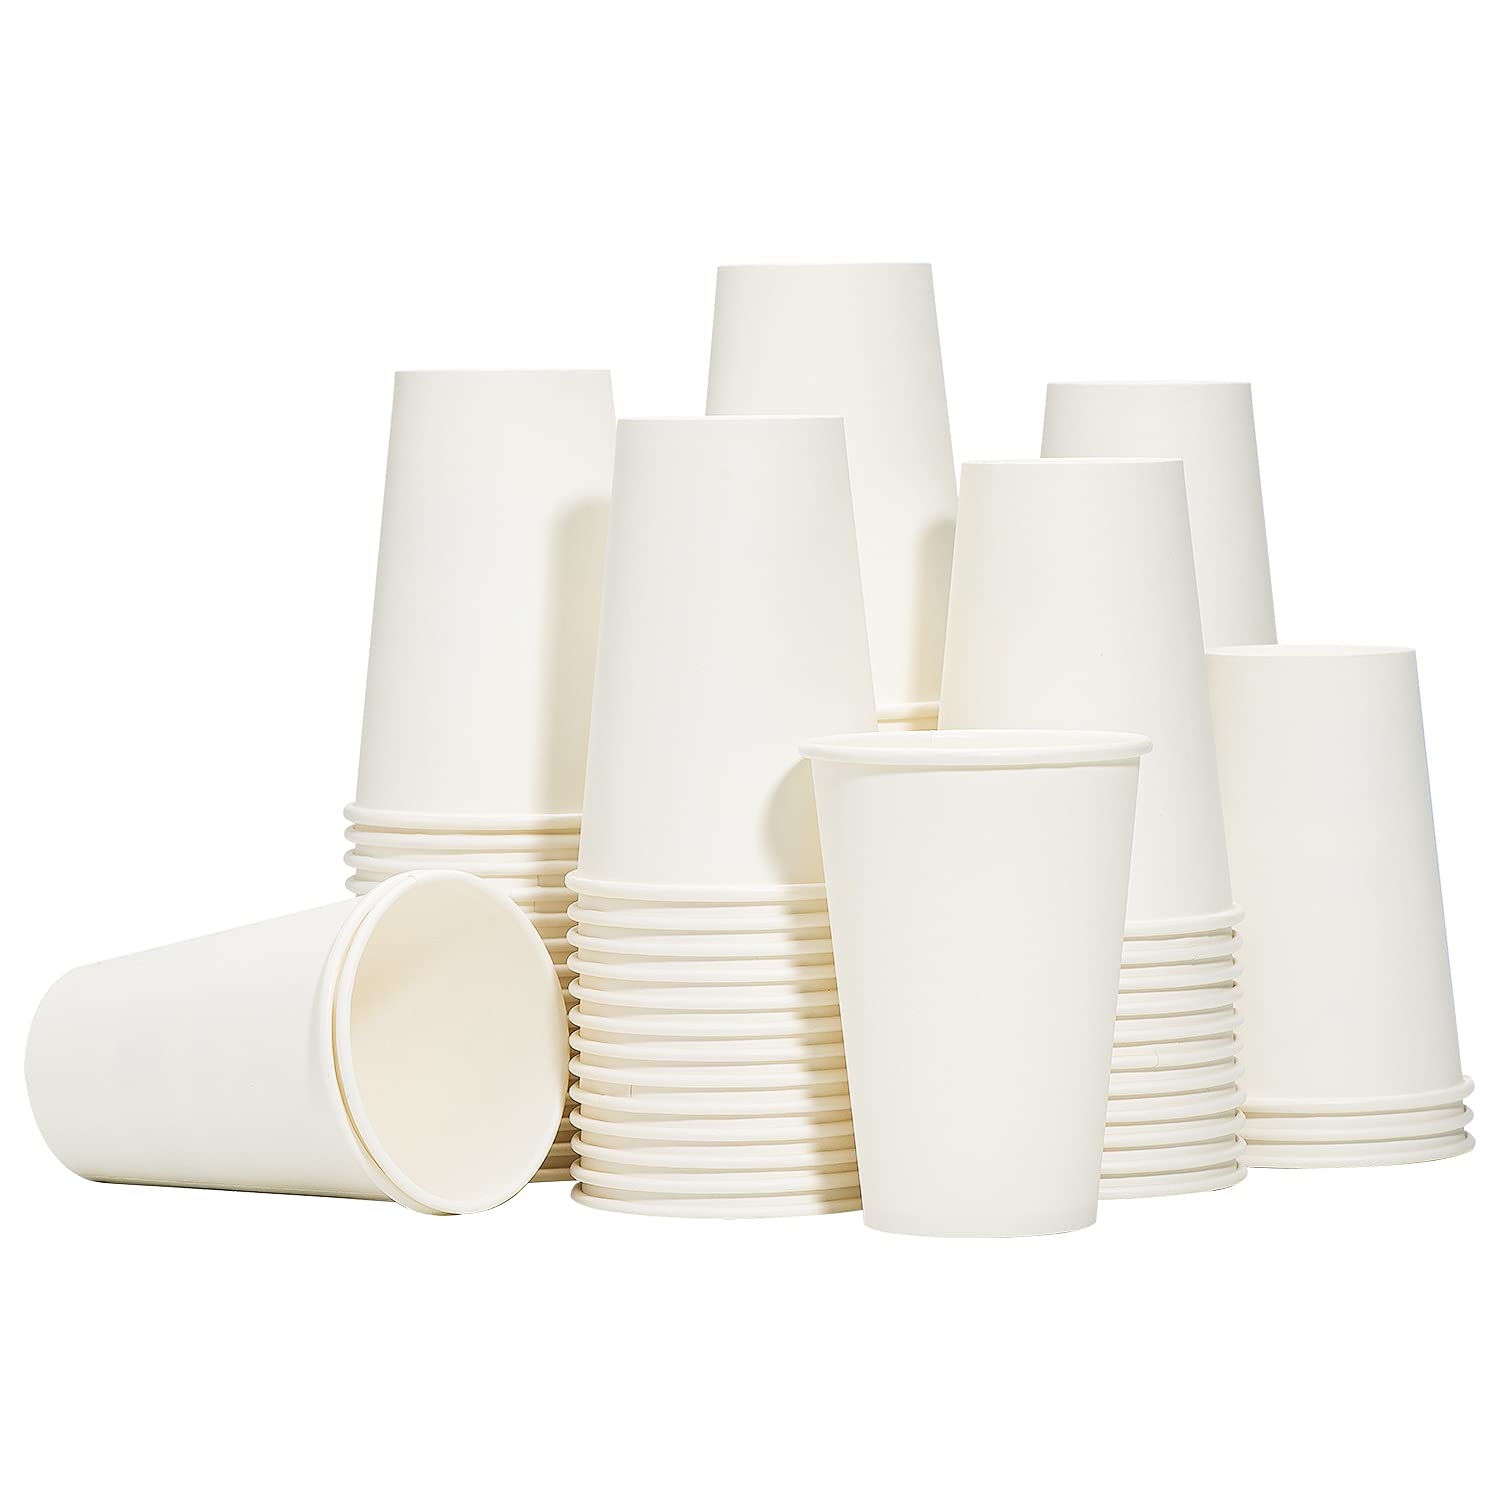 RACETOP Disposable Paper Coffee Cups 12 oz 100 Pack,12 oz White